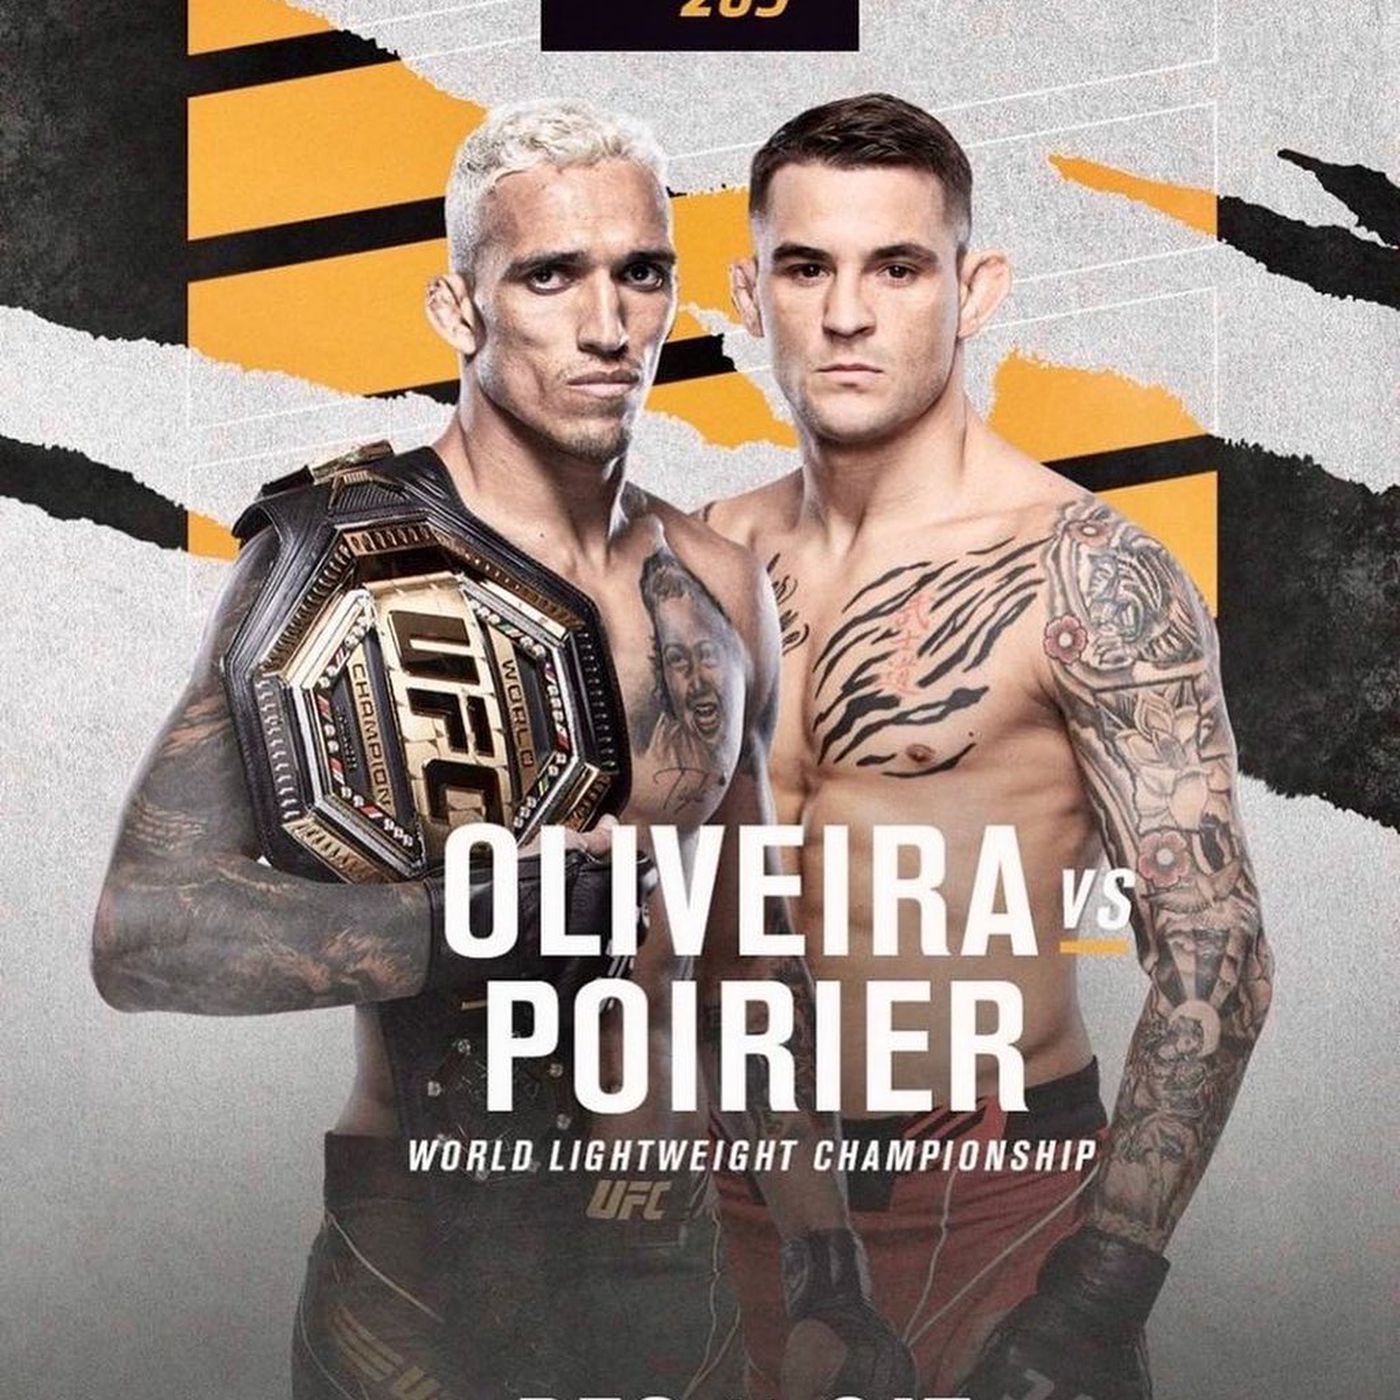 Latest UFC 269 fight card, rumors, and updates for &#39;Oliveira vs Poirier&#39;  PPV on Dec. 11 in Las Vegas - MMAmania.com